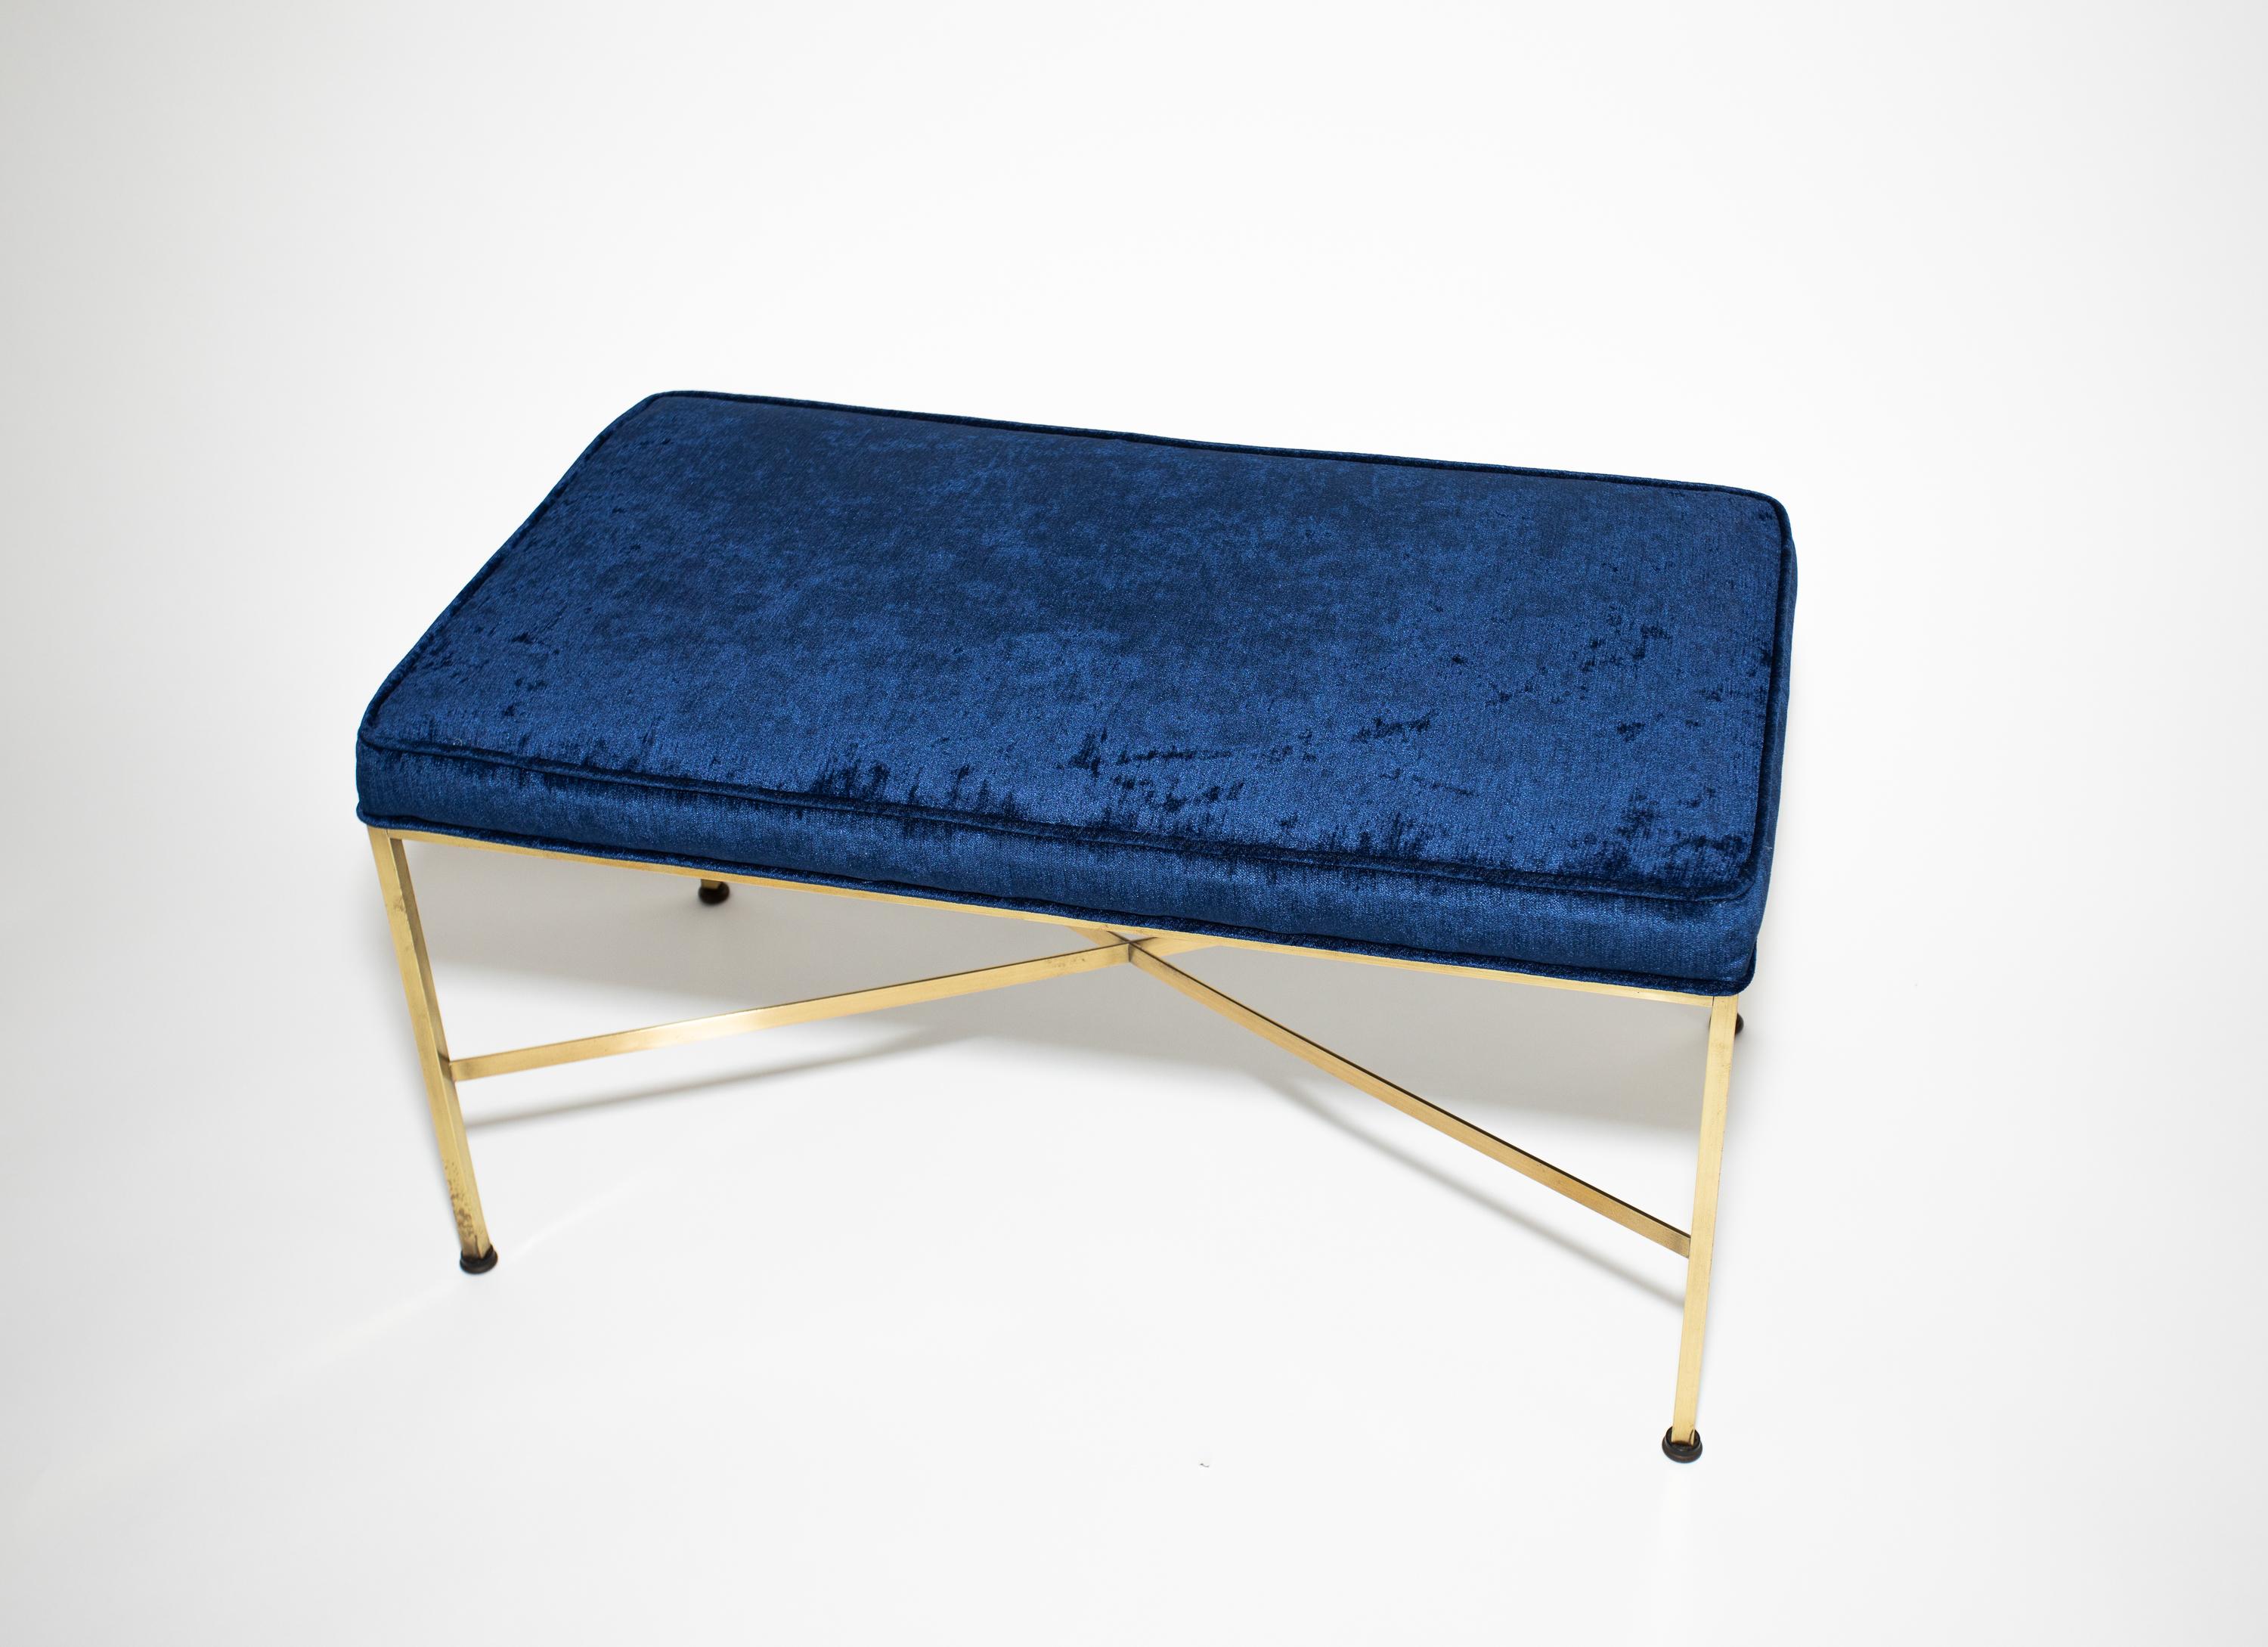 Paul Mccobb Upholstered Bench.
Manufactured by Calvin.
Original brass structure and pad feet.
Recently re-upholstered in blue velvet.